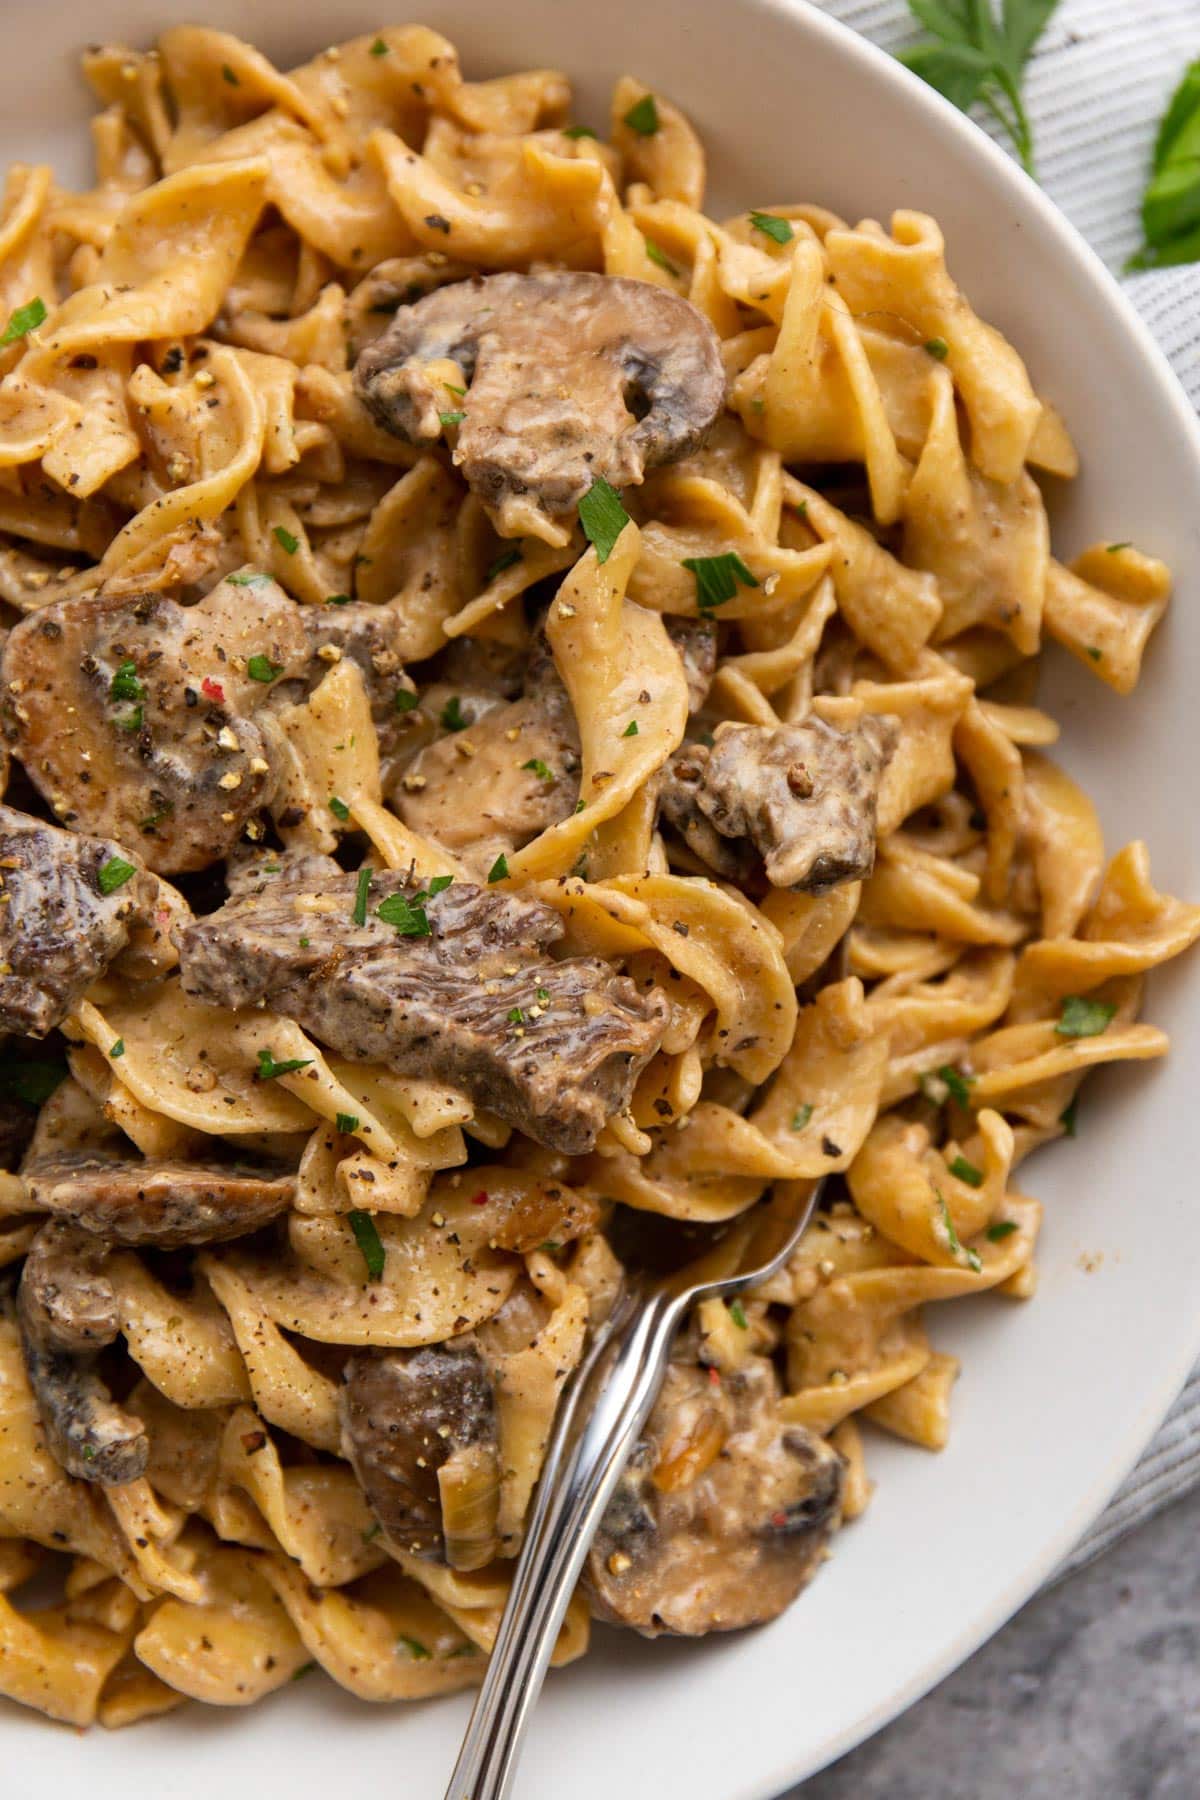 Creamy beef stroganoff on a bed of egg noodles in a white low bowl.